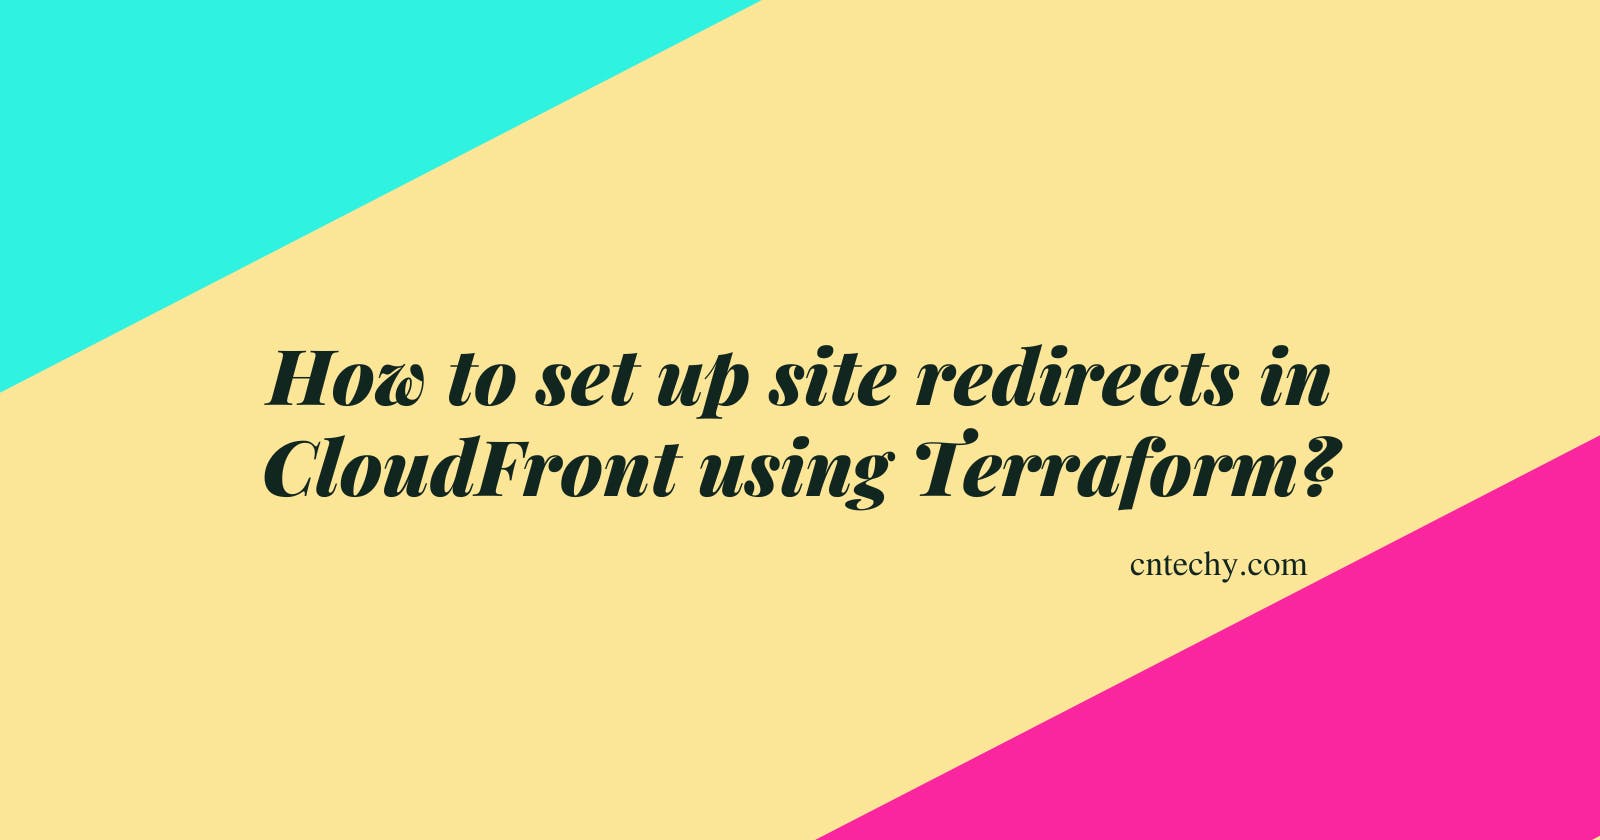 How to set up site redirects in CloudFront using Terraform?